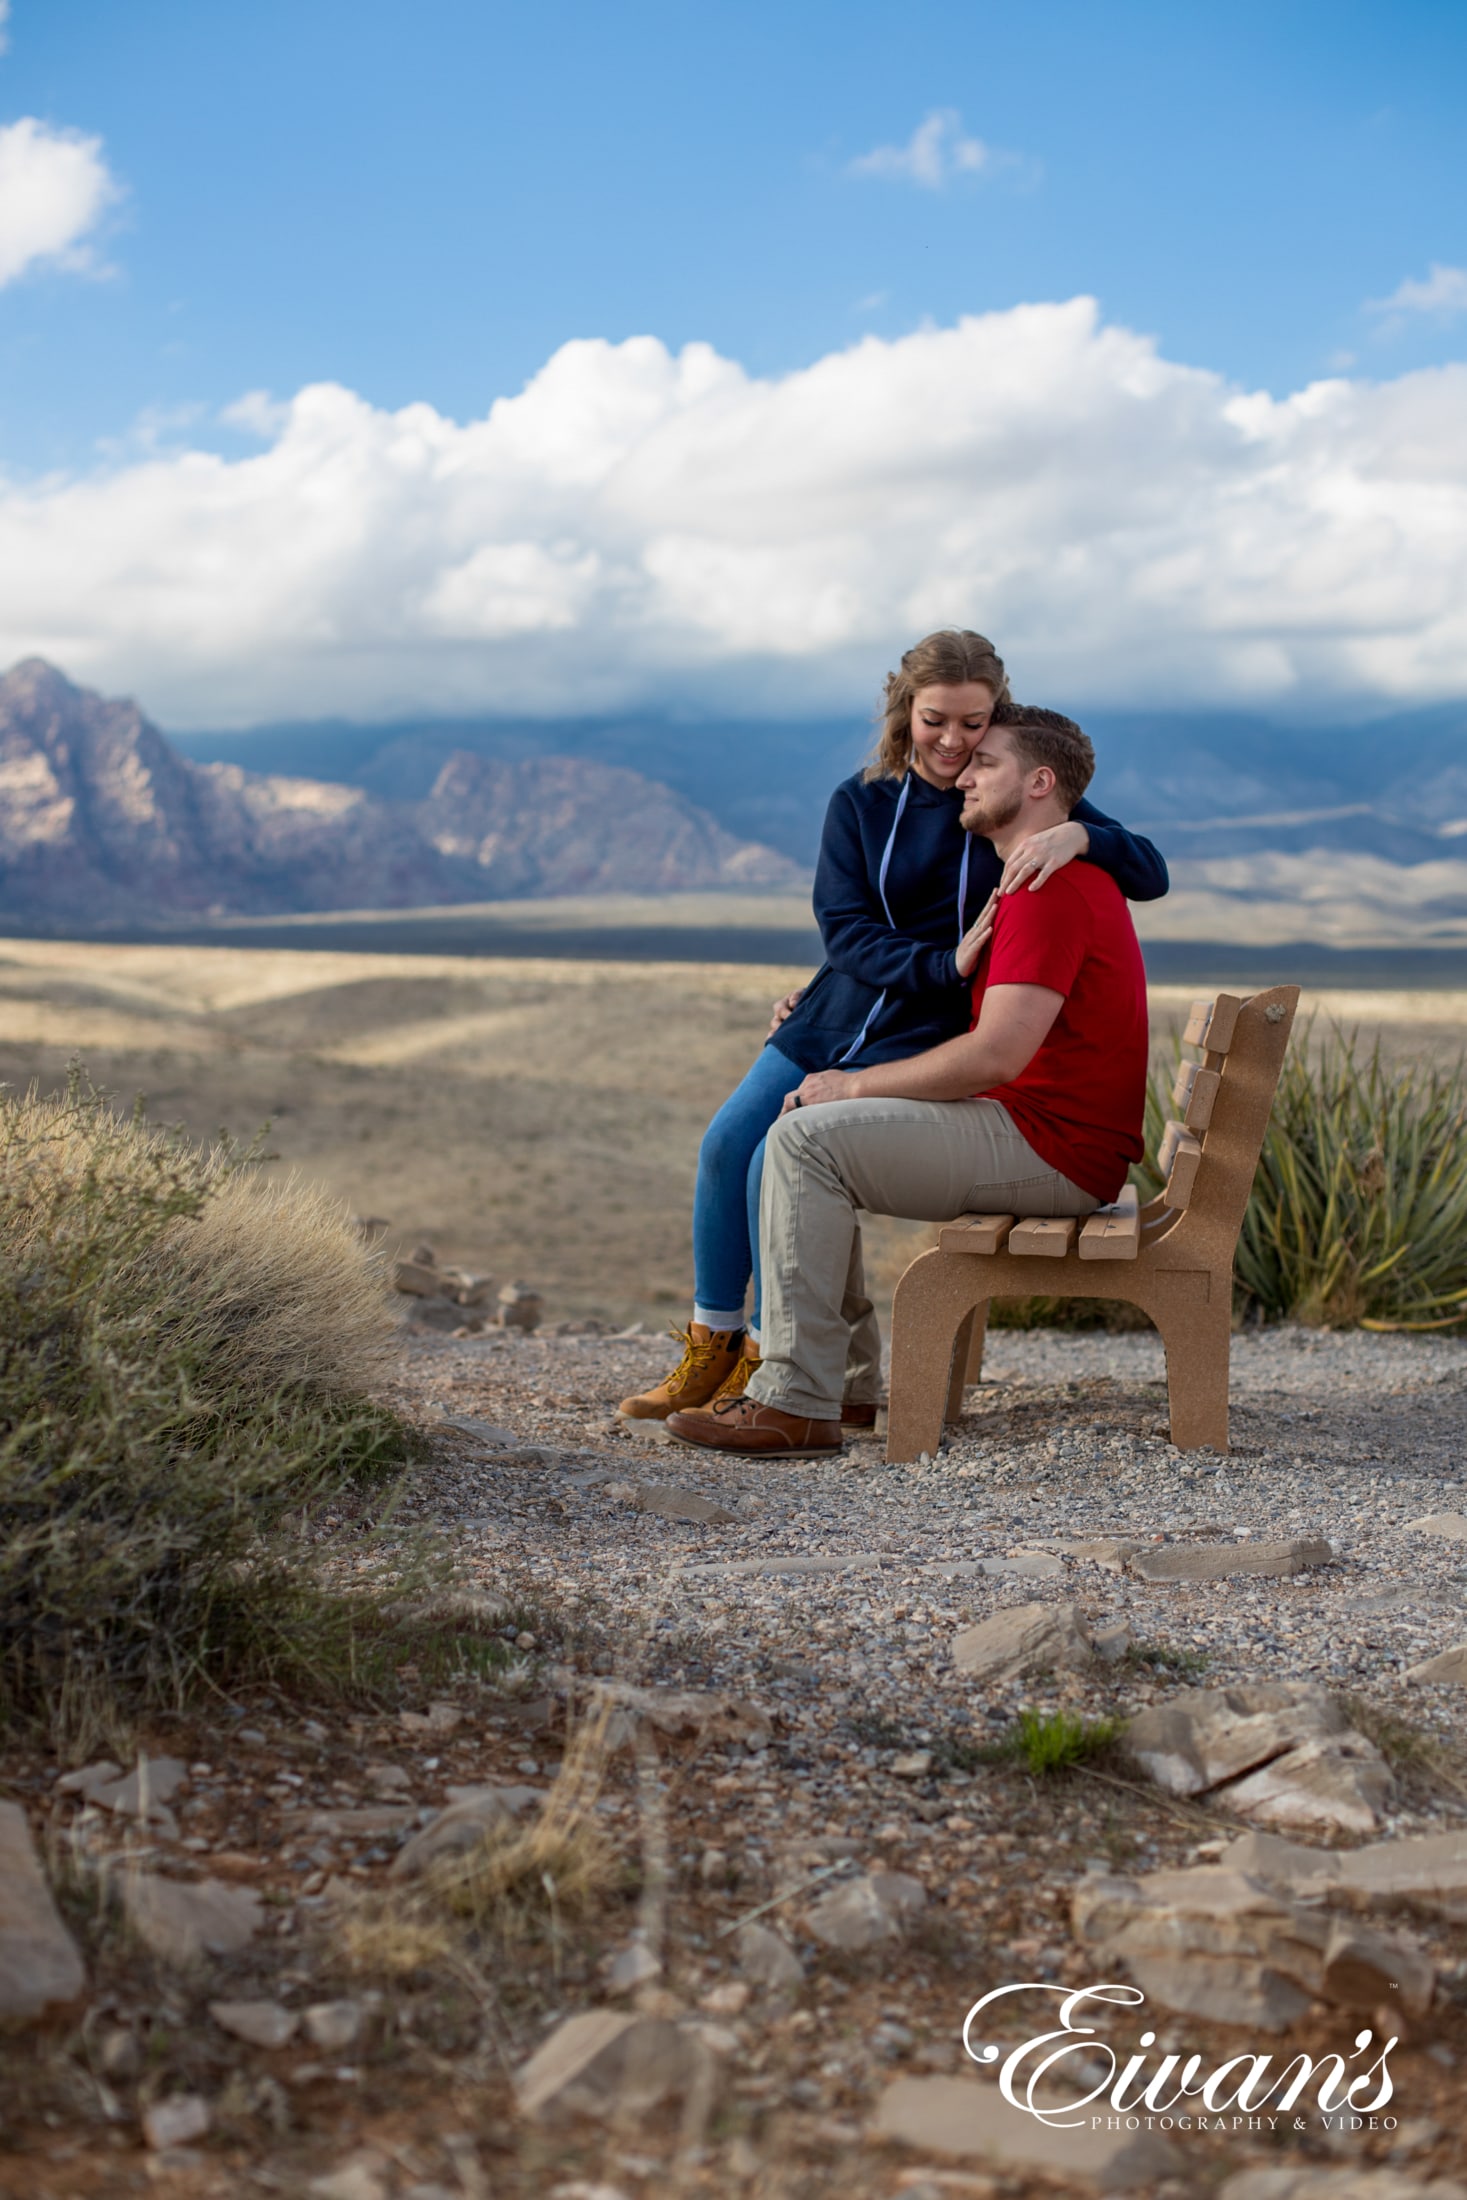 image of a couple in the mountains